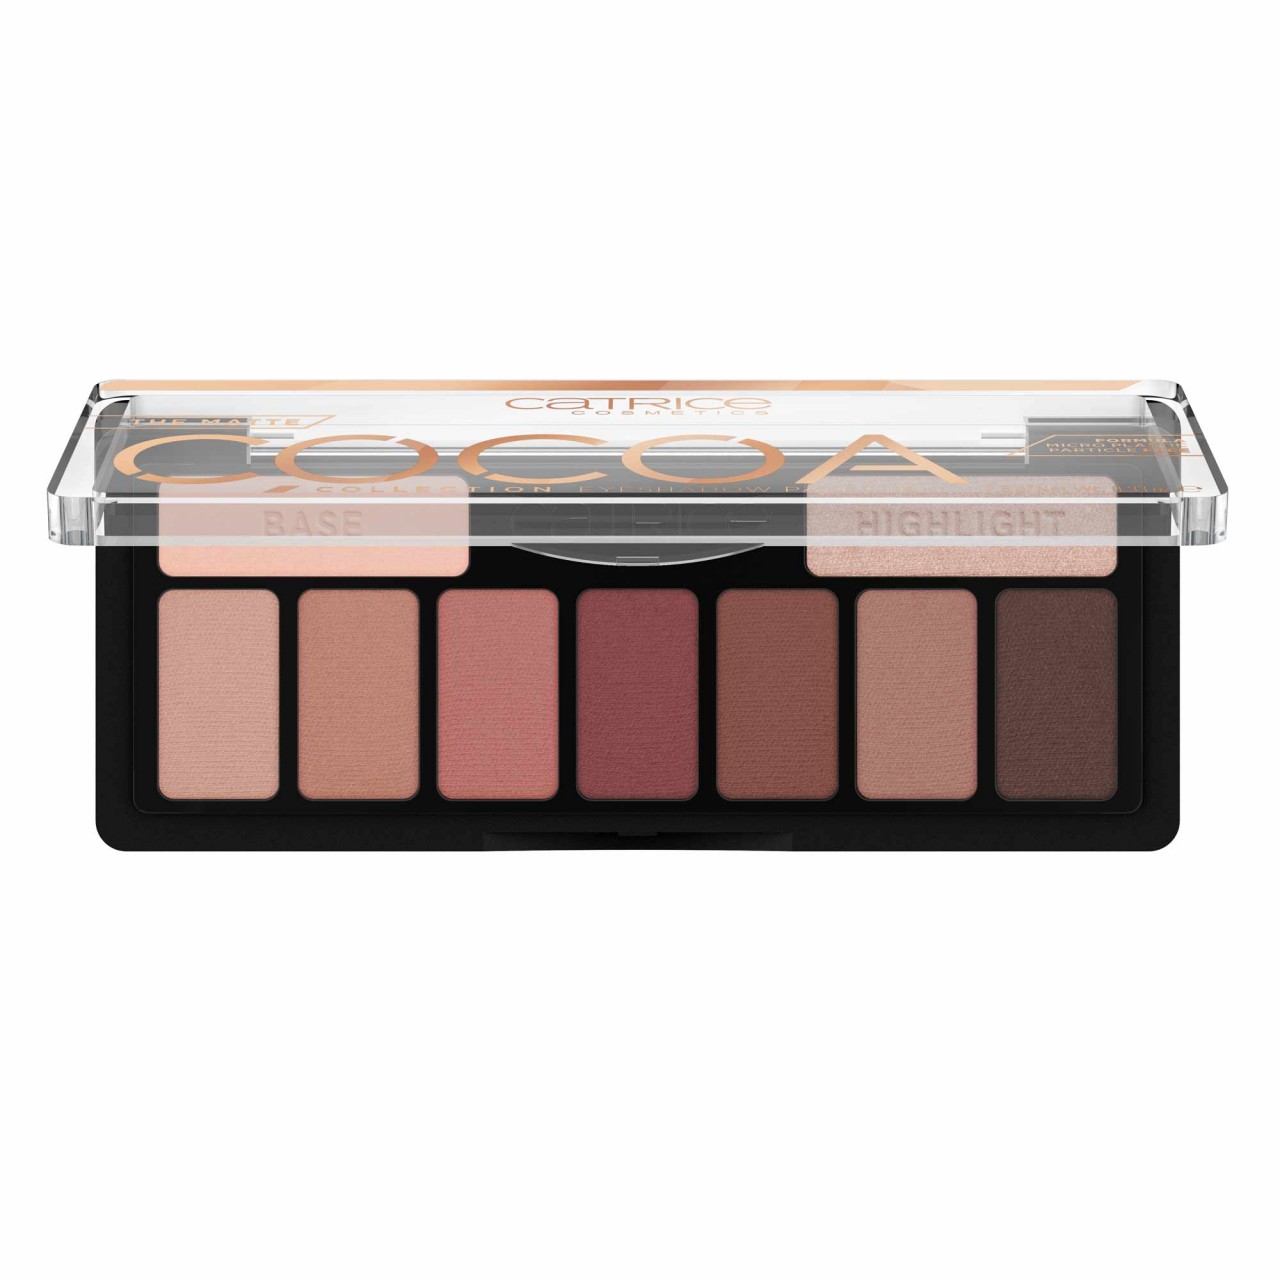 CATRICE - Eyeshadow Matte Cocoa Collection Palette - 